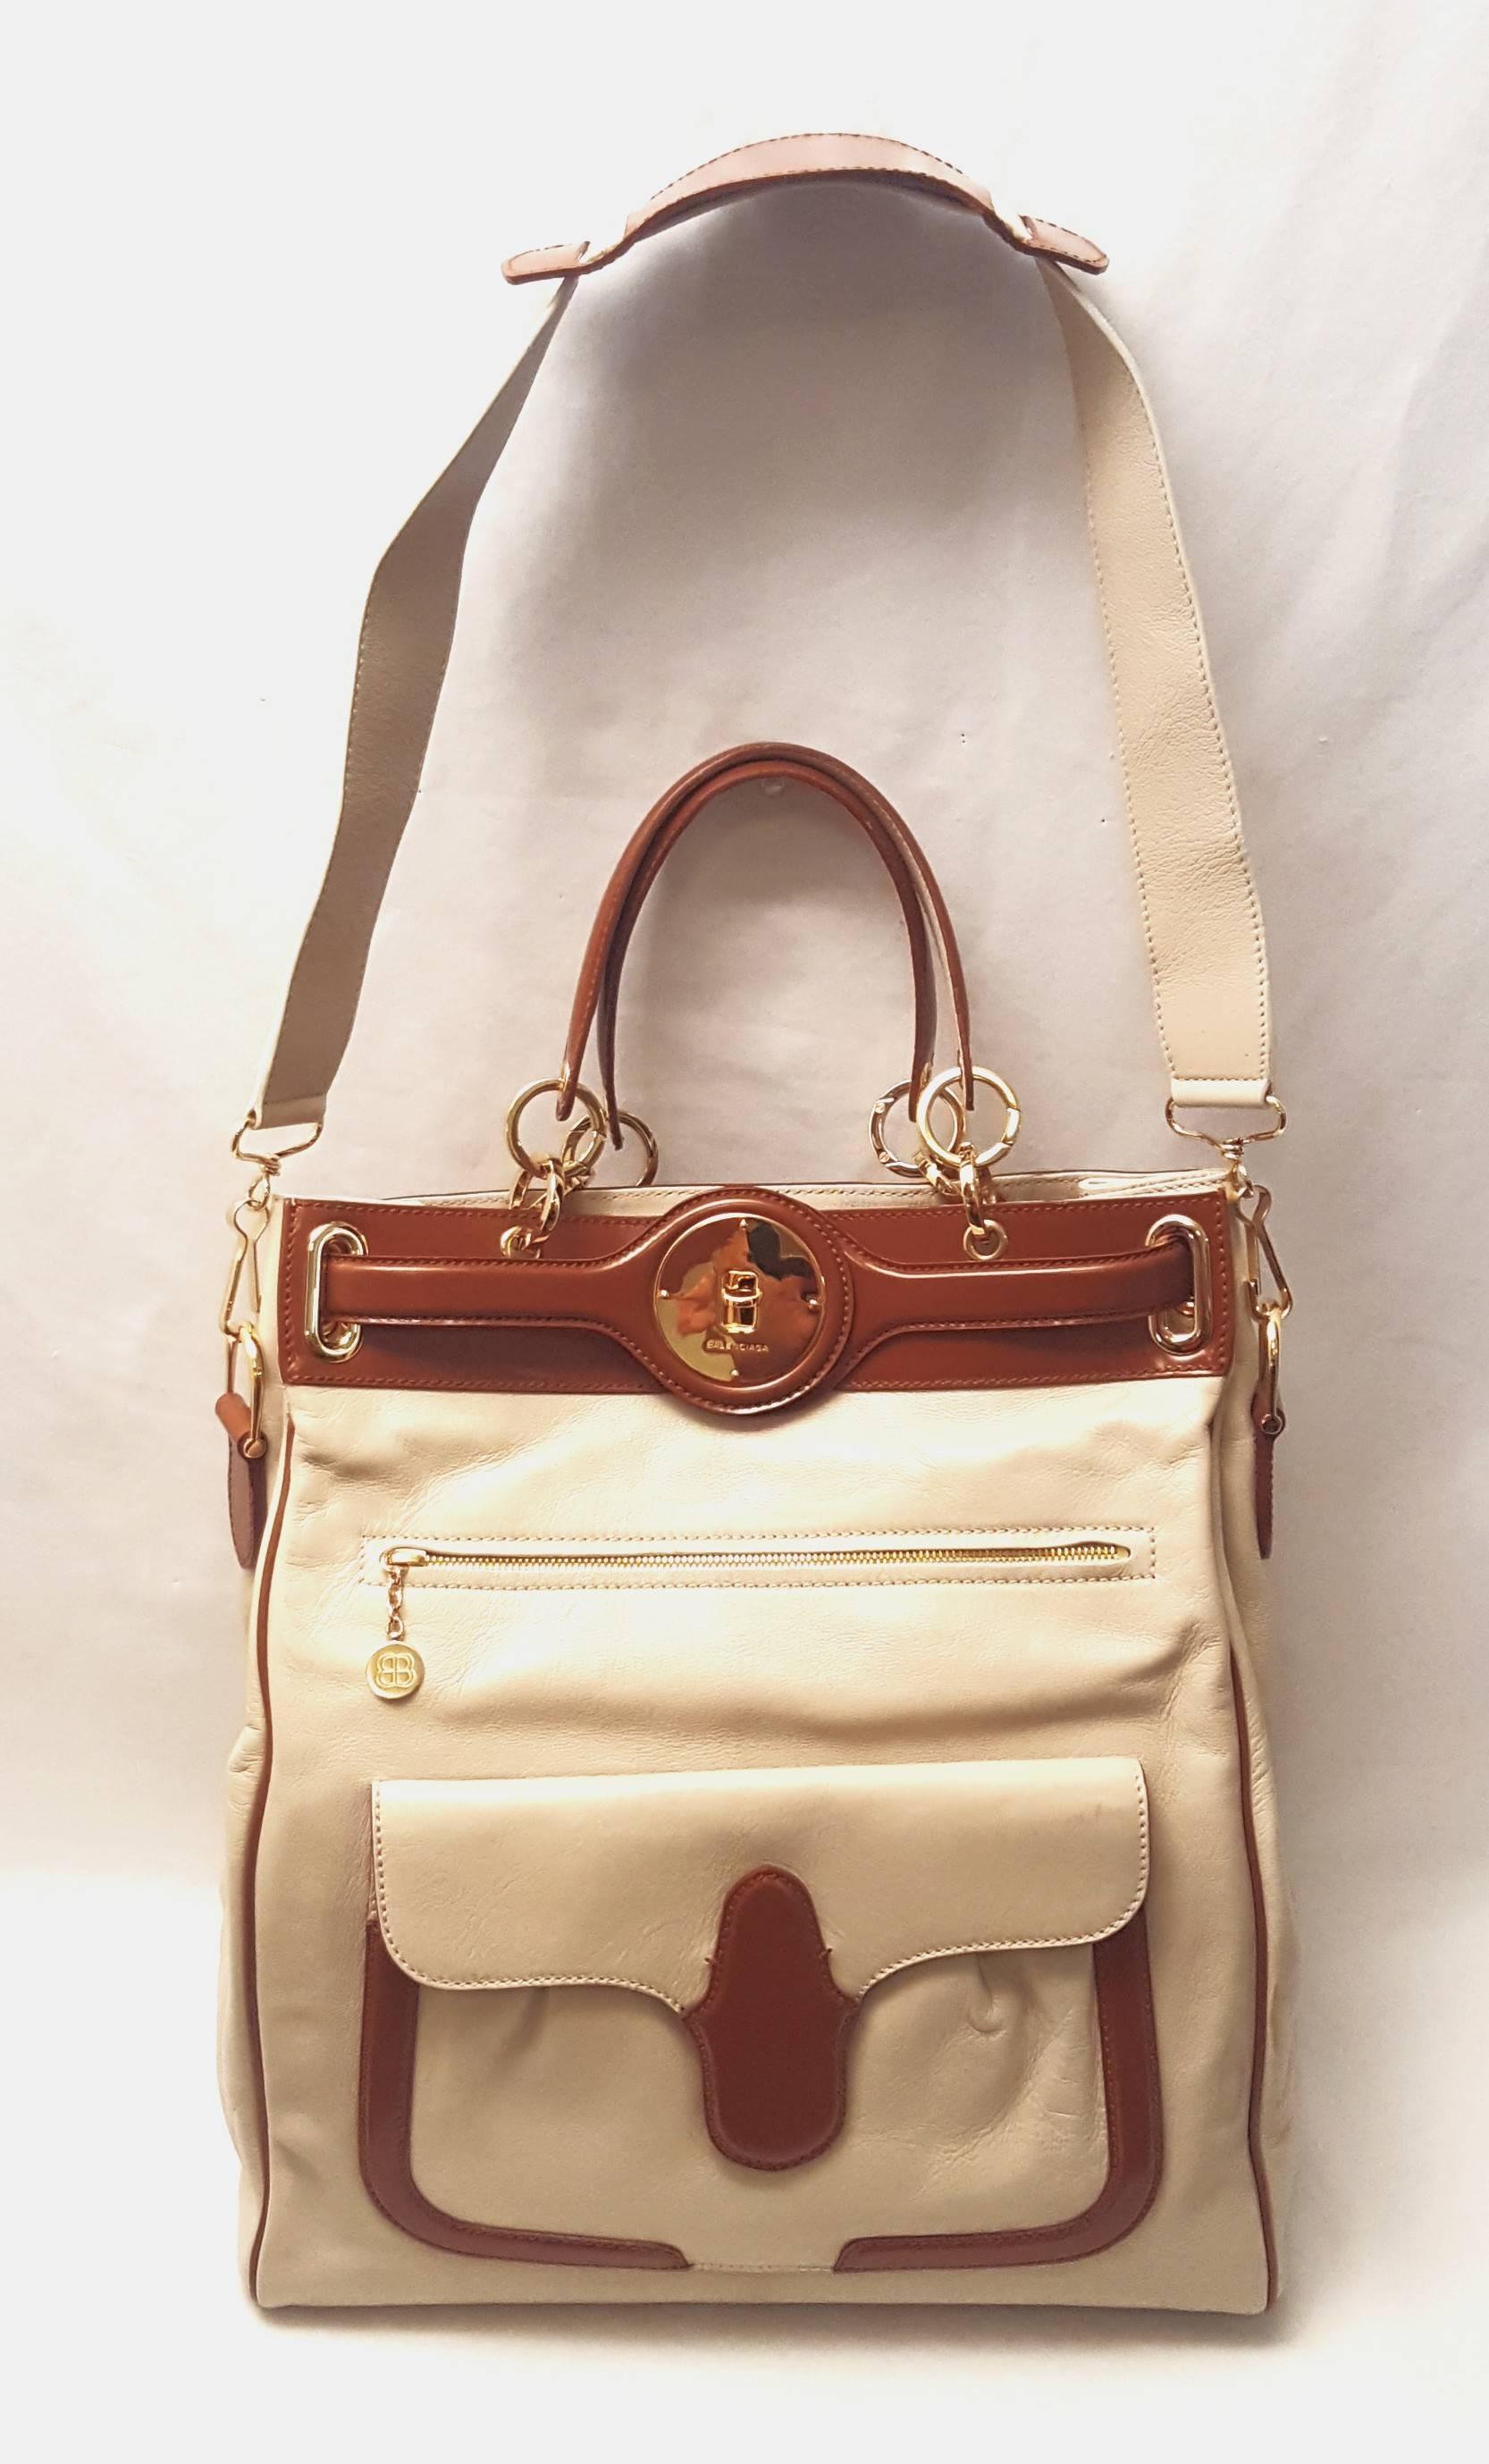 Balenciaga beige and brown from the 2008 collection with gold tone hardware travels well as a carry on or for a day excursion. This bag is lined in black canvas and contains one single large opening with one side zippered pocket.   The exterior has